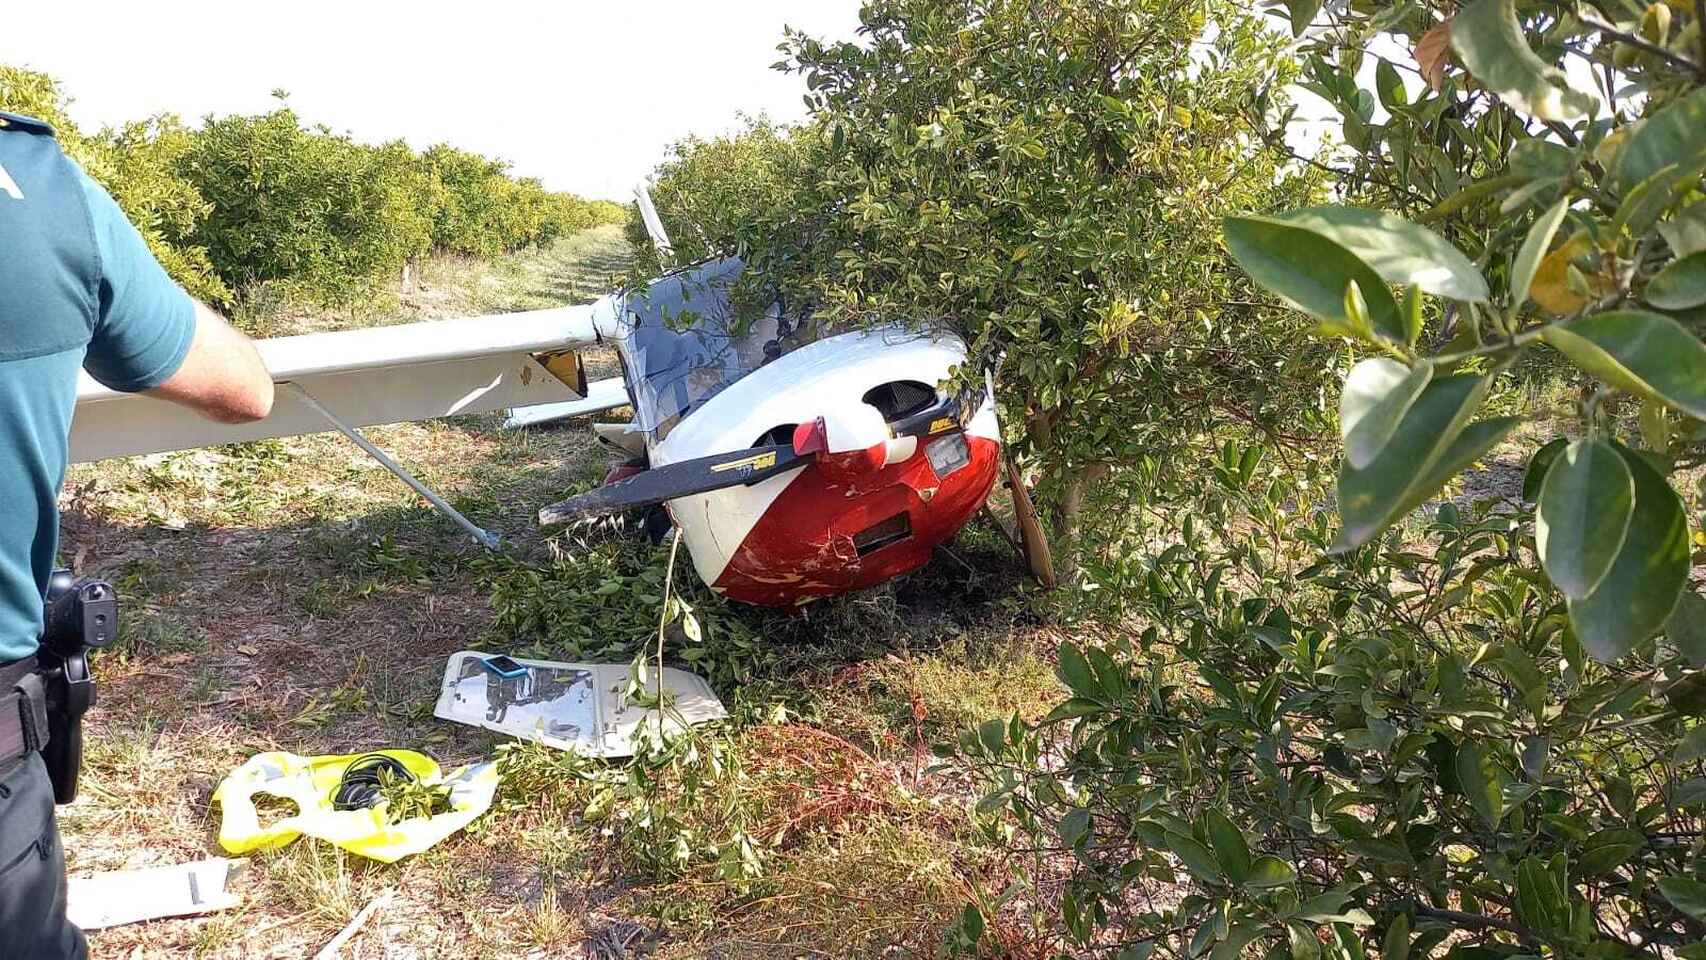 Brit's Lucky Escape As His Plane Crashes Into Lemon Trees On The Costa Blanca In Spain